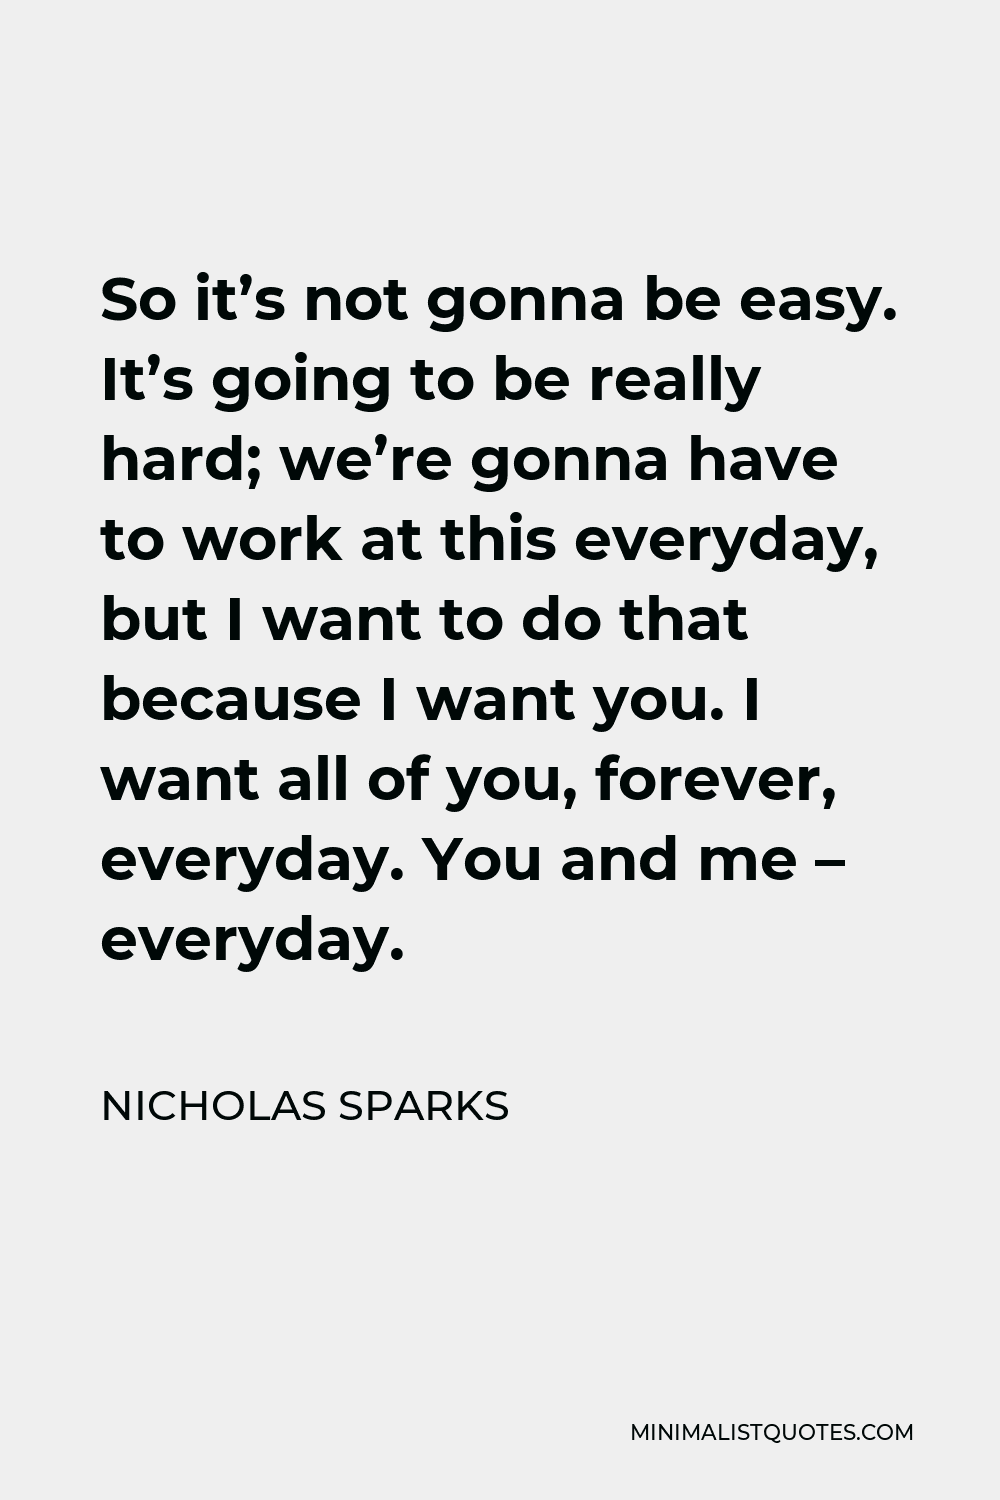 Nicholas Sparks Quote - So it’s not gonna be easy. It’s going to be really hard; we’re gonna have to work at this everyday, but I want to do that because I want you. I want all of you, forever, everyday. You and me – everyday.